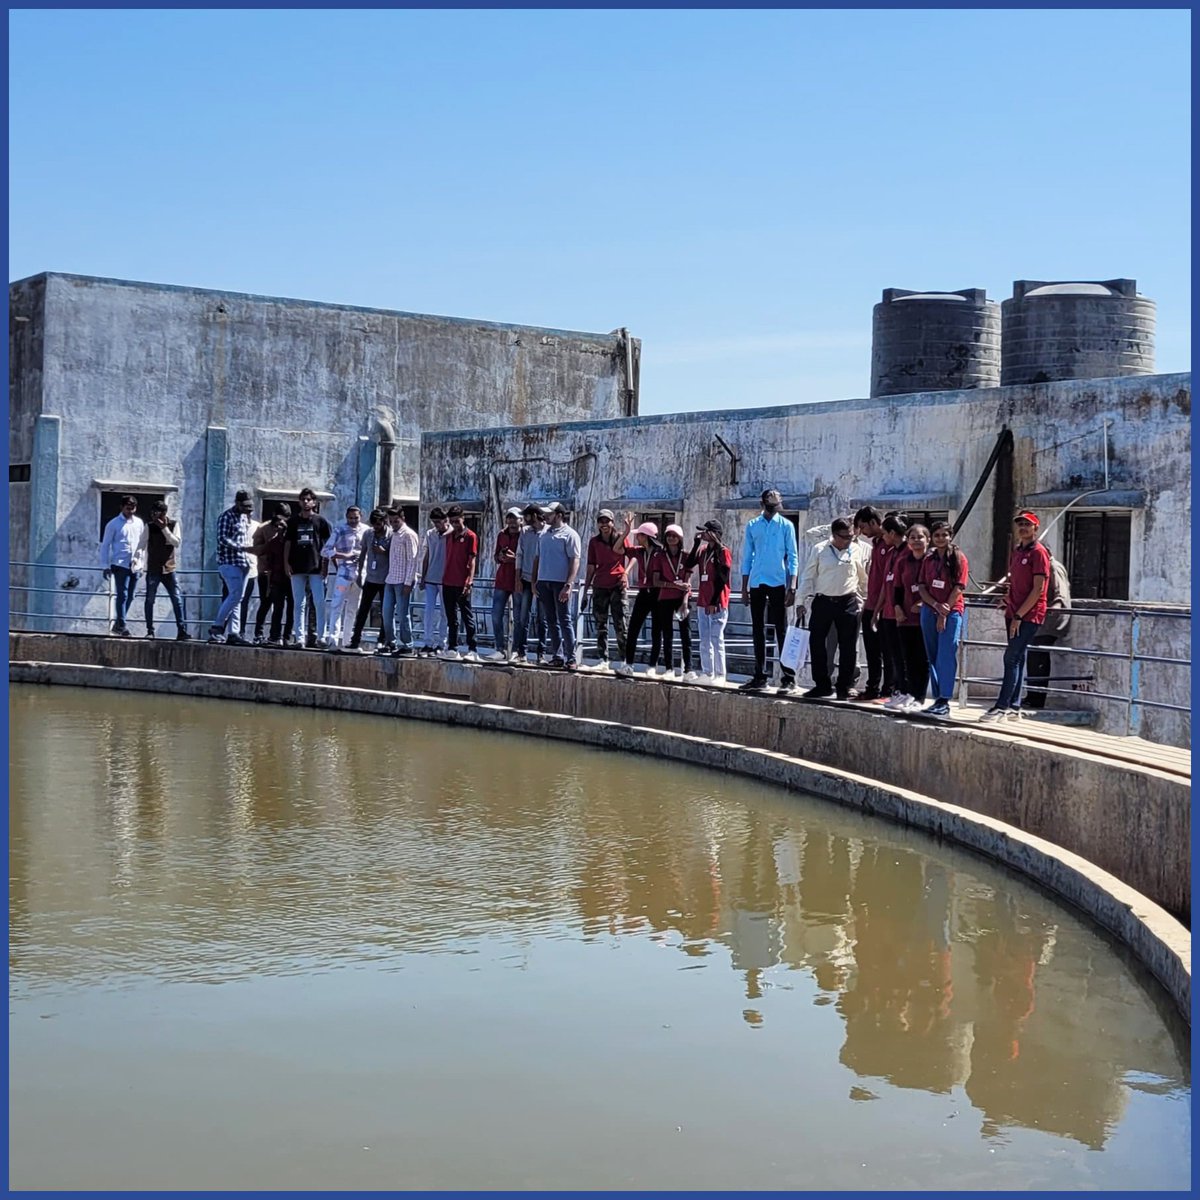 From classroom theories to real-world solutions! Our Civil Engineering squad delved deep into the mechanics of Ozat Dam 2 and its Water Treatment Plant. Witnessing innovation in action! 💡🌊 #EngineeringExcellence #HandsOnLearning
#DSU #DrSubhashUniversity